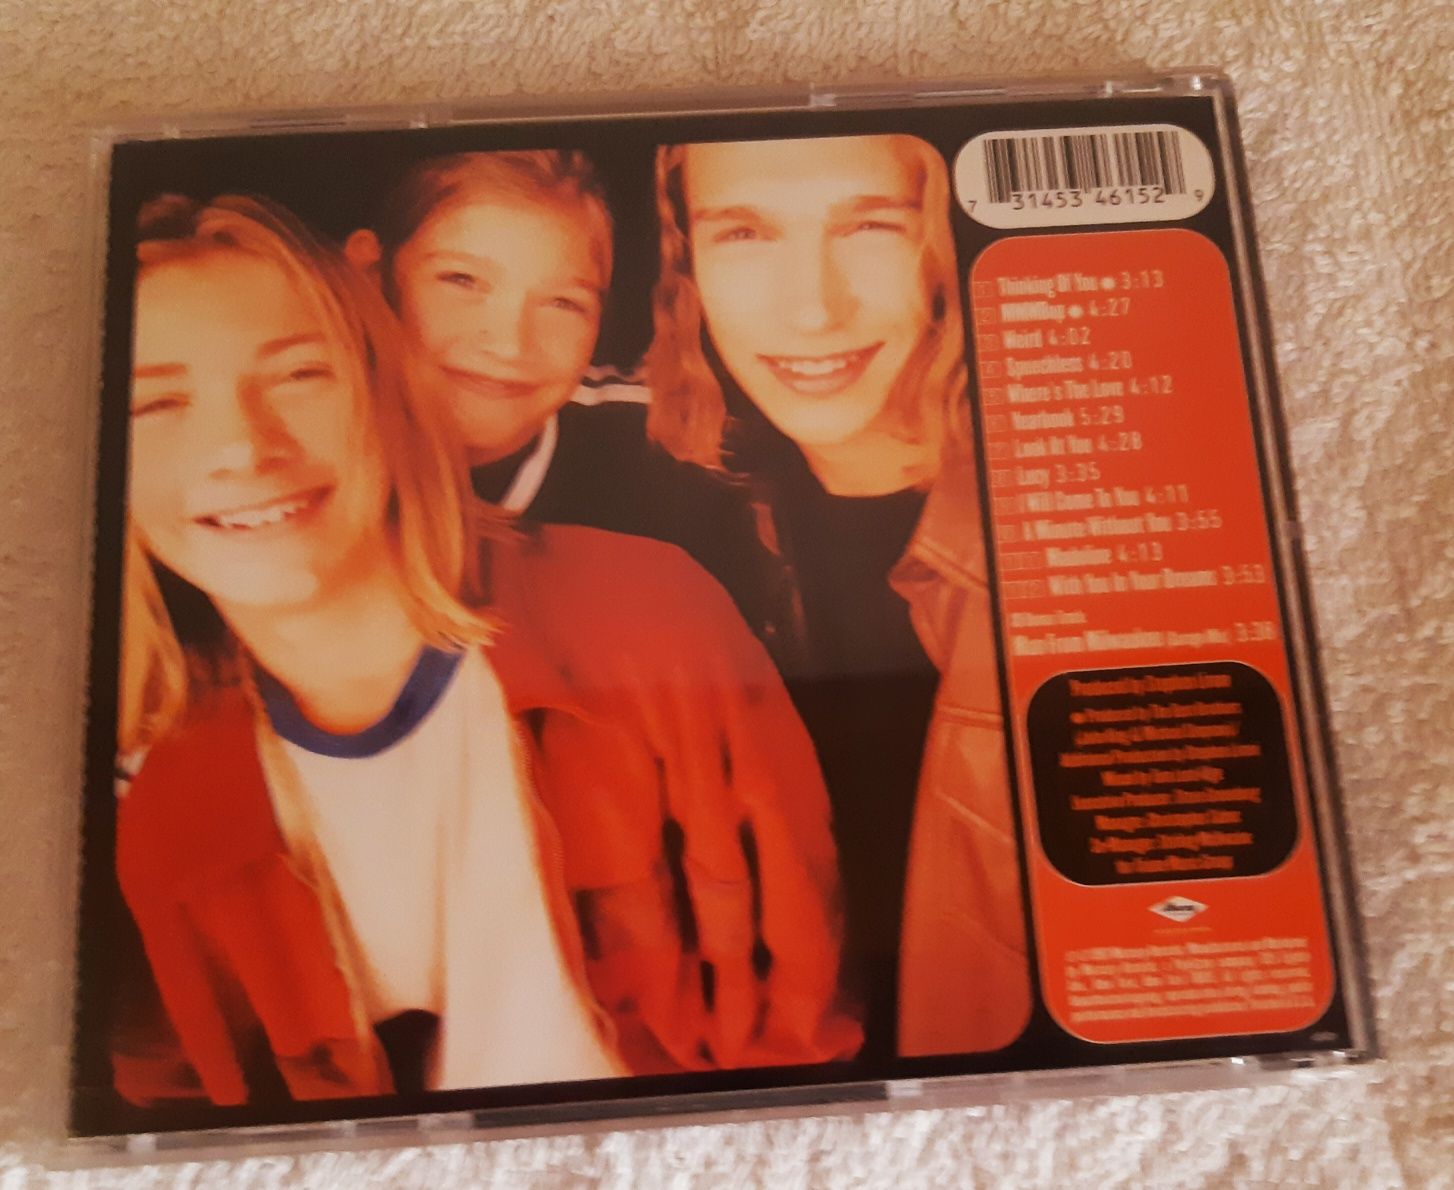 Hanson - Cd "Middle of Nowhere"